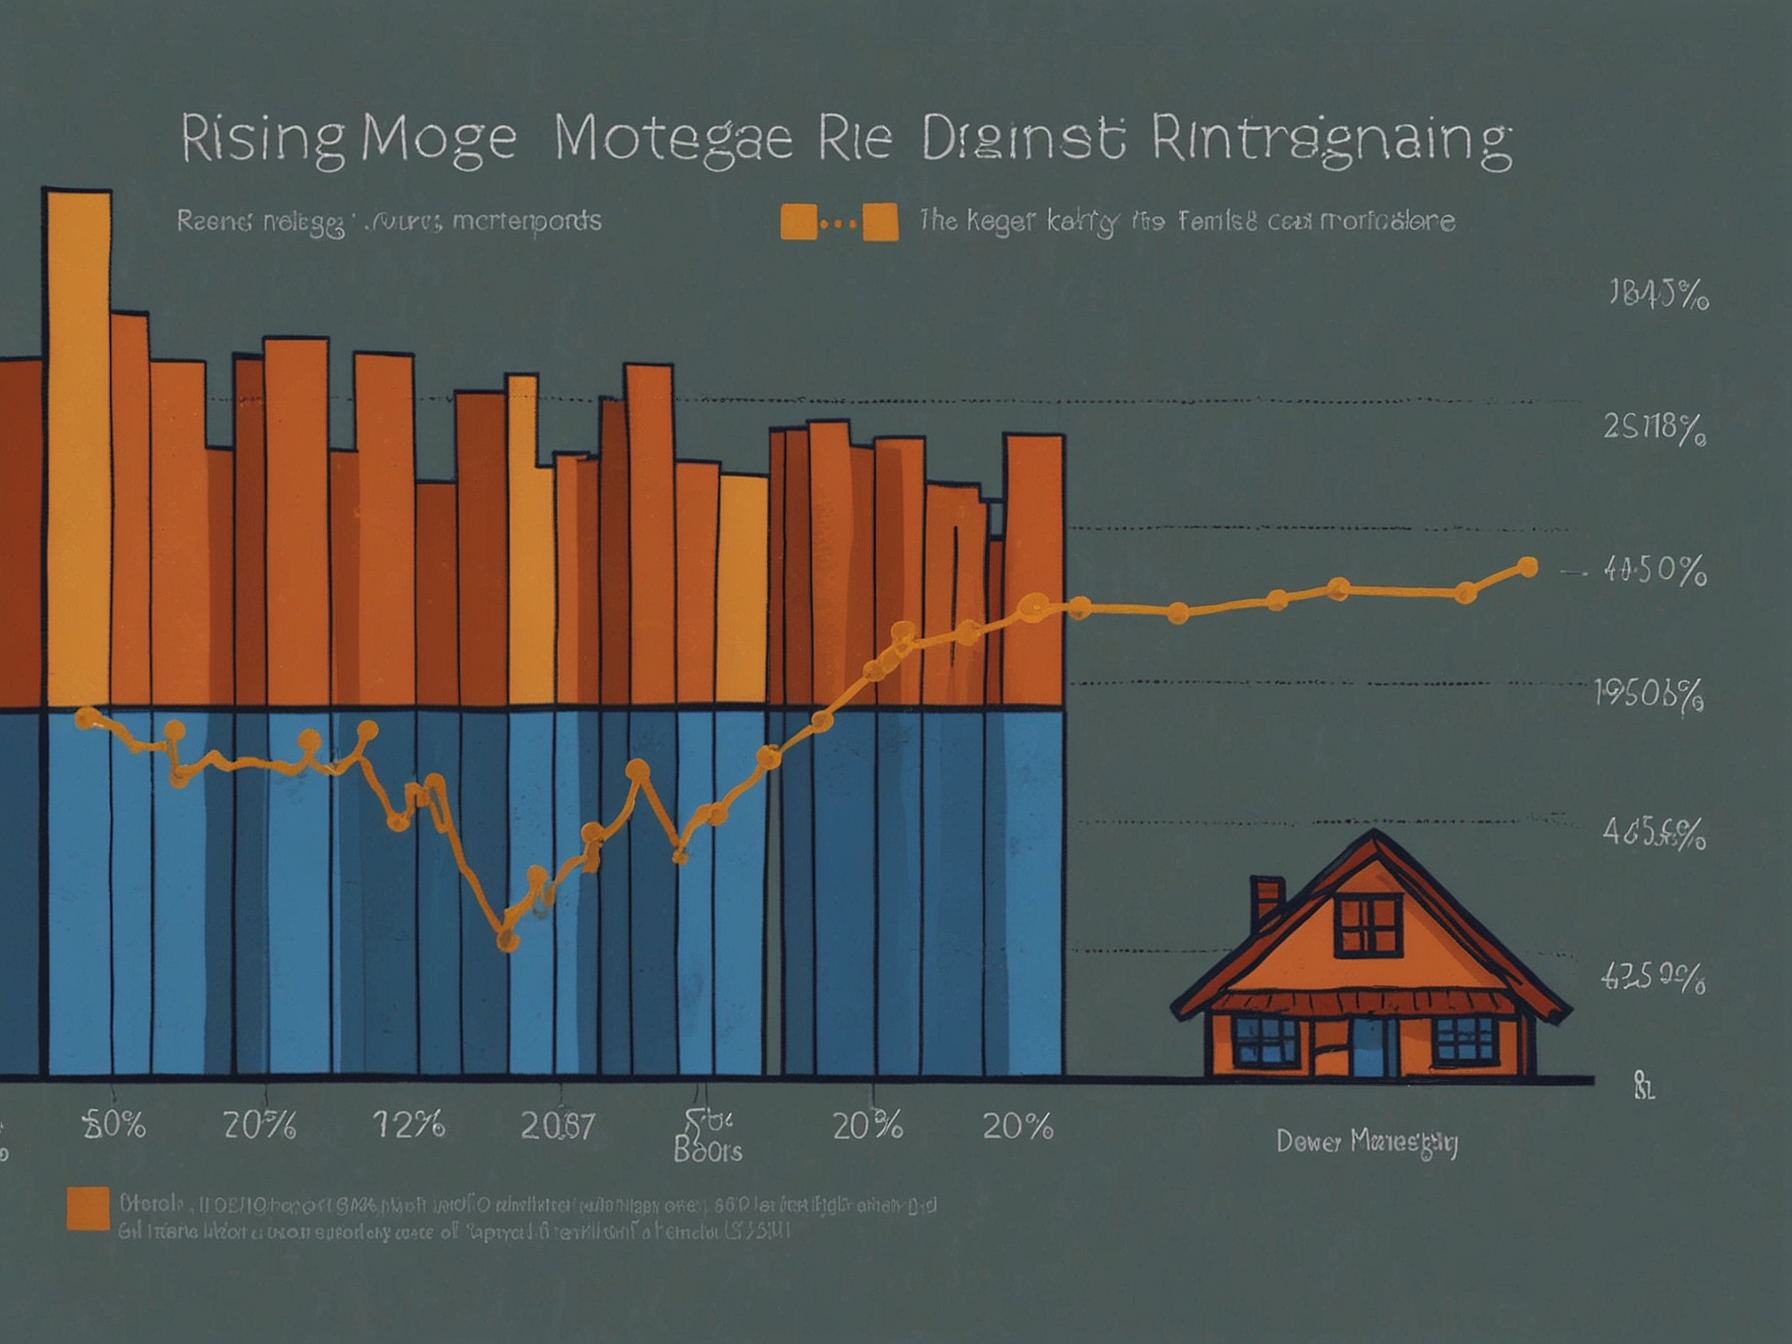 A graph showing the rising mortgage rates over the past few years, with a comparison to the costs associated with renting, highlighting the current trend favoring rental over buying.